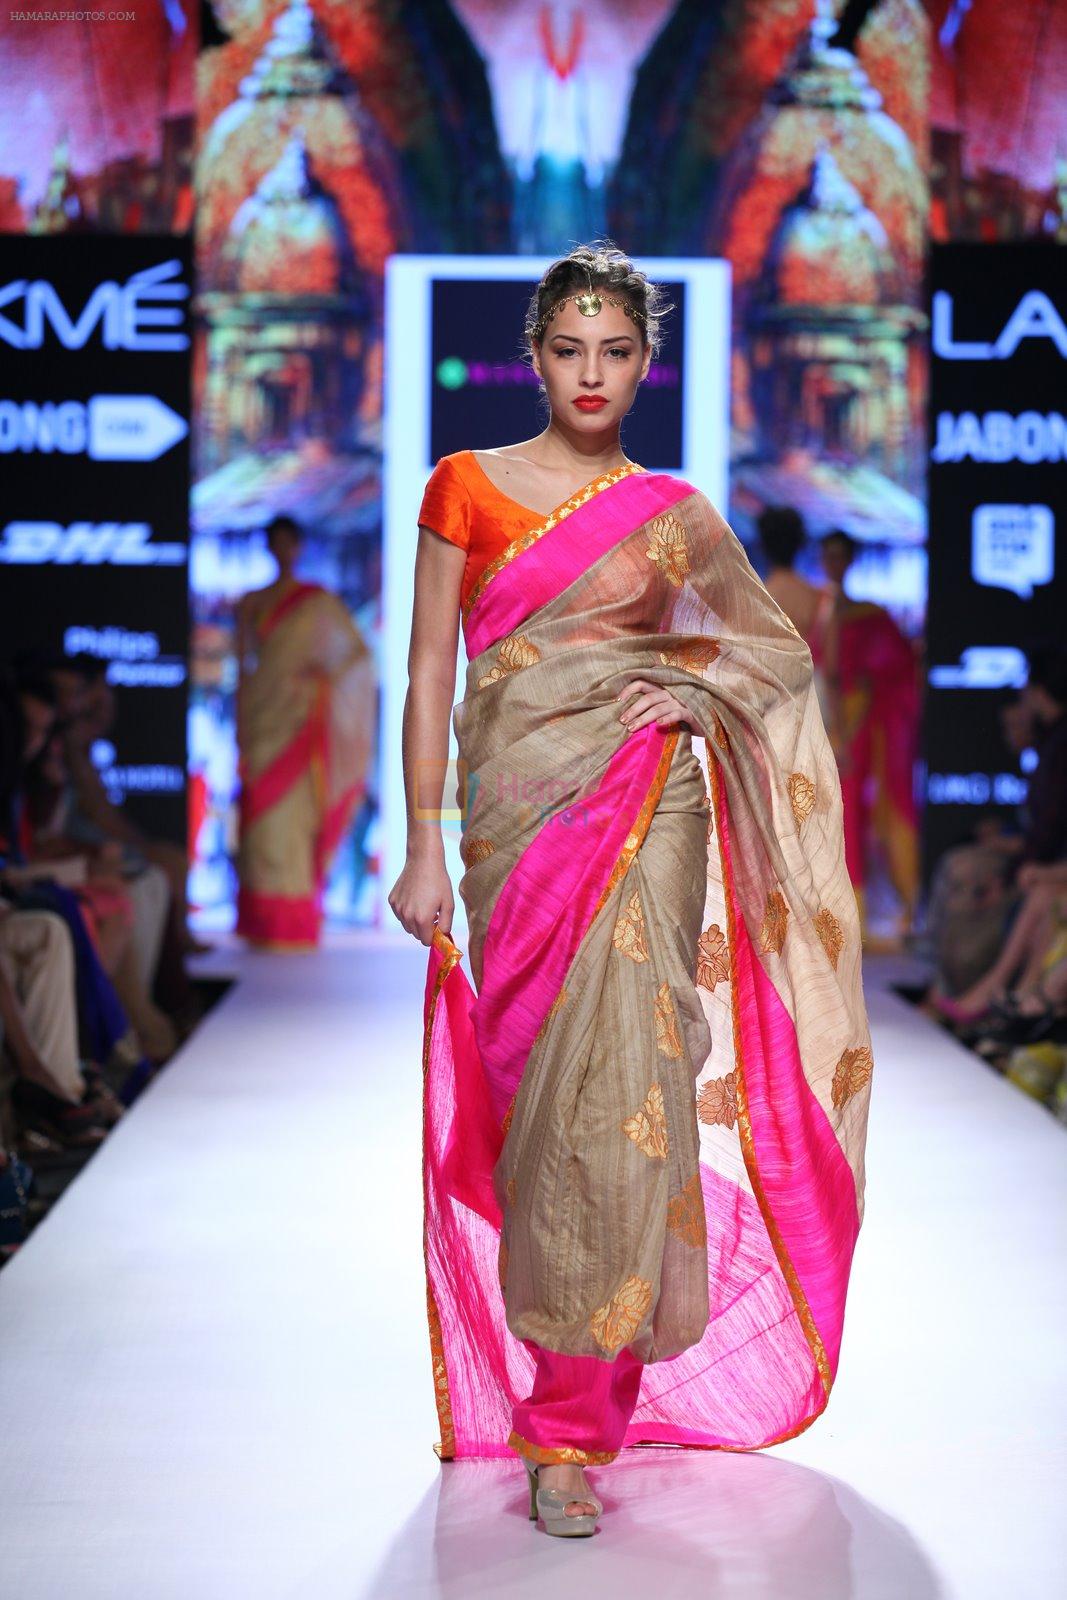 Model walk the ramp for Mandira Bedi Show at Lakme Fashion Week 2015 Day 5 on 22nd March 2015